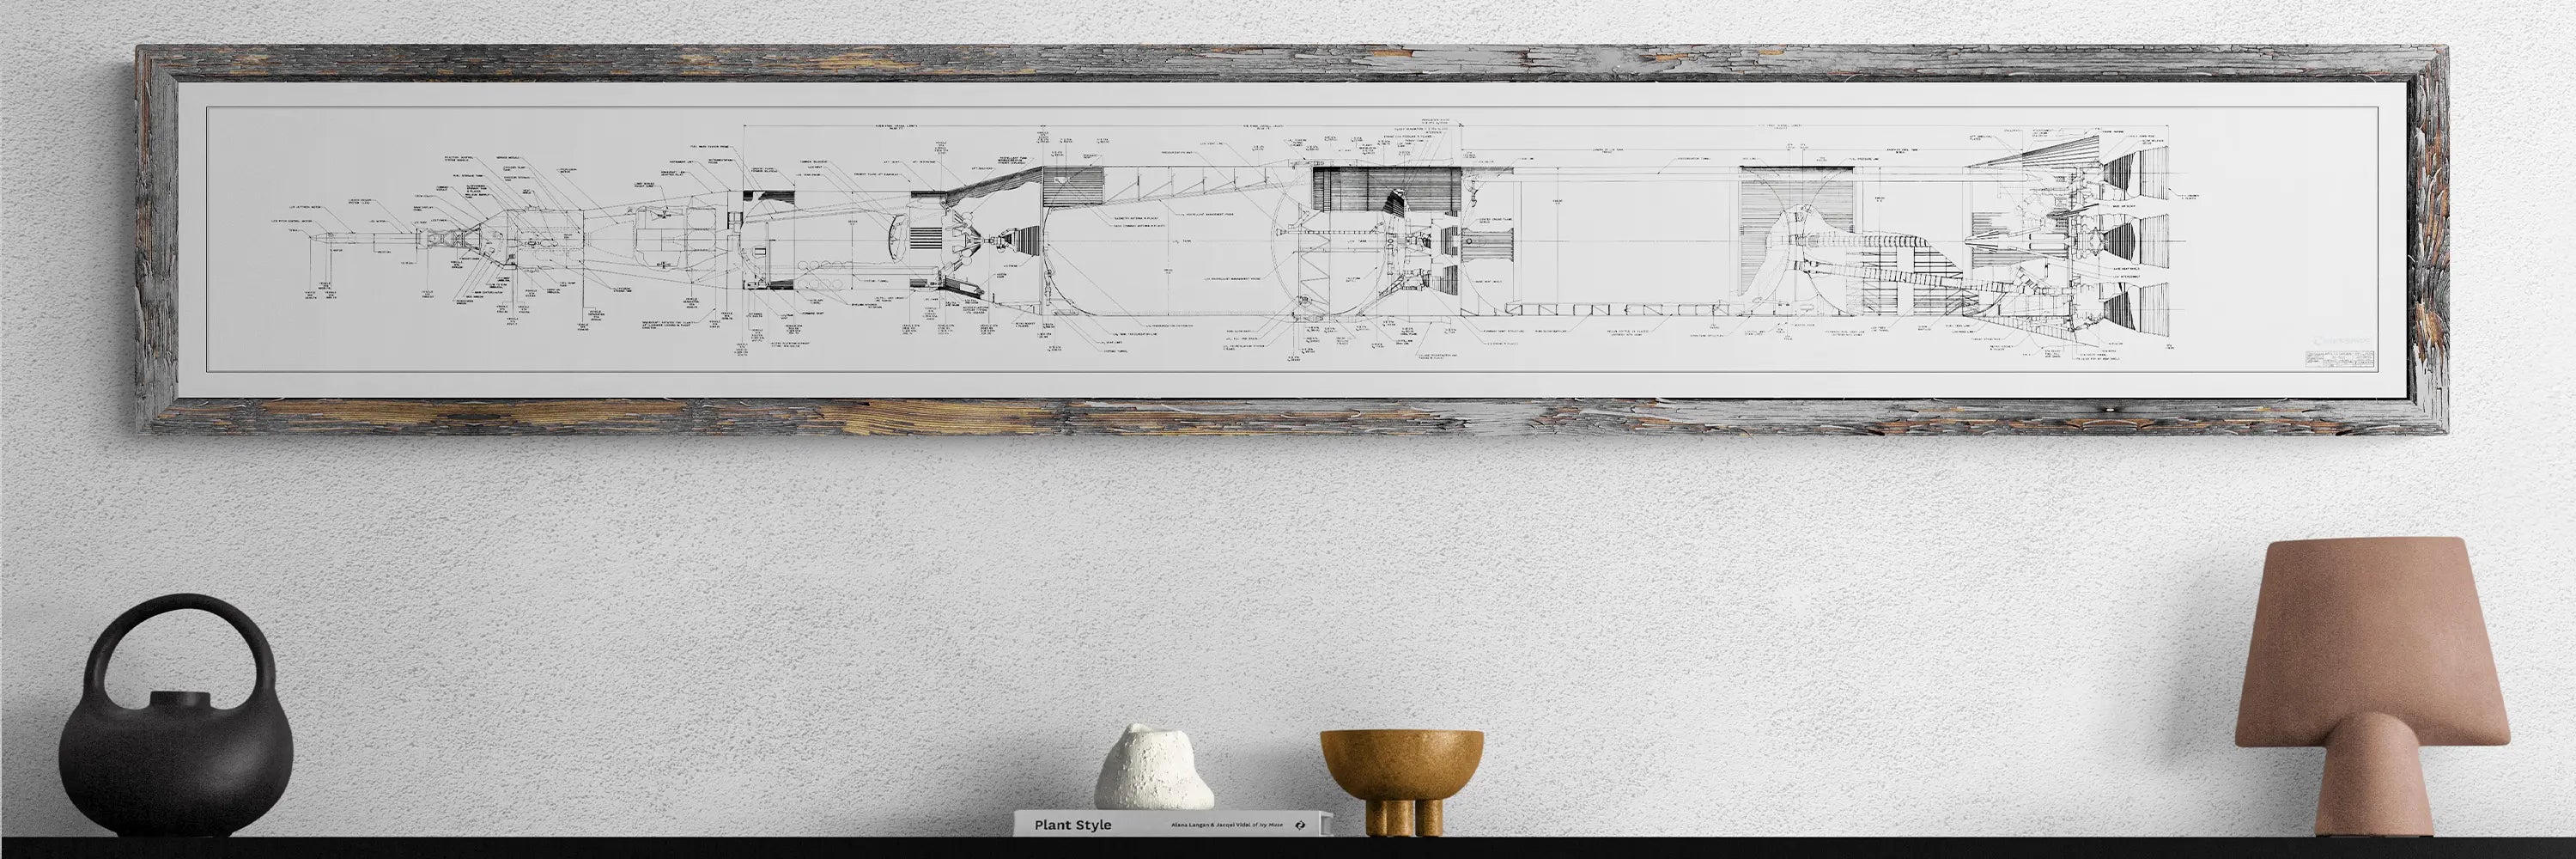 Apollo Saturn Blueprint | NASA posters | The framed Saturn V NASA blueprint, showing detailed technical drawings of the rocket, hangs on a light wall above a table. The table is decorated with a black teapot-shaped vase, a small white sculpture, a brass bowl, and a brown ceramic lamp, creating a modern and elegant look.